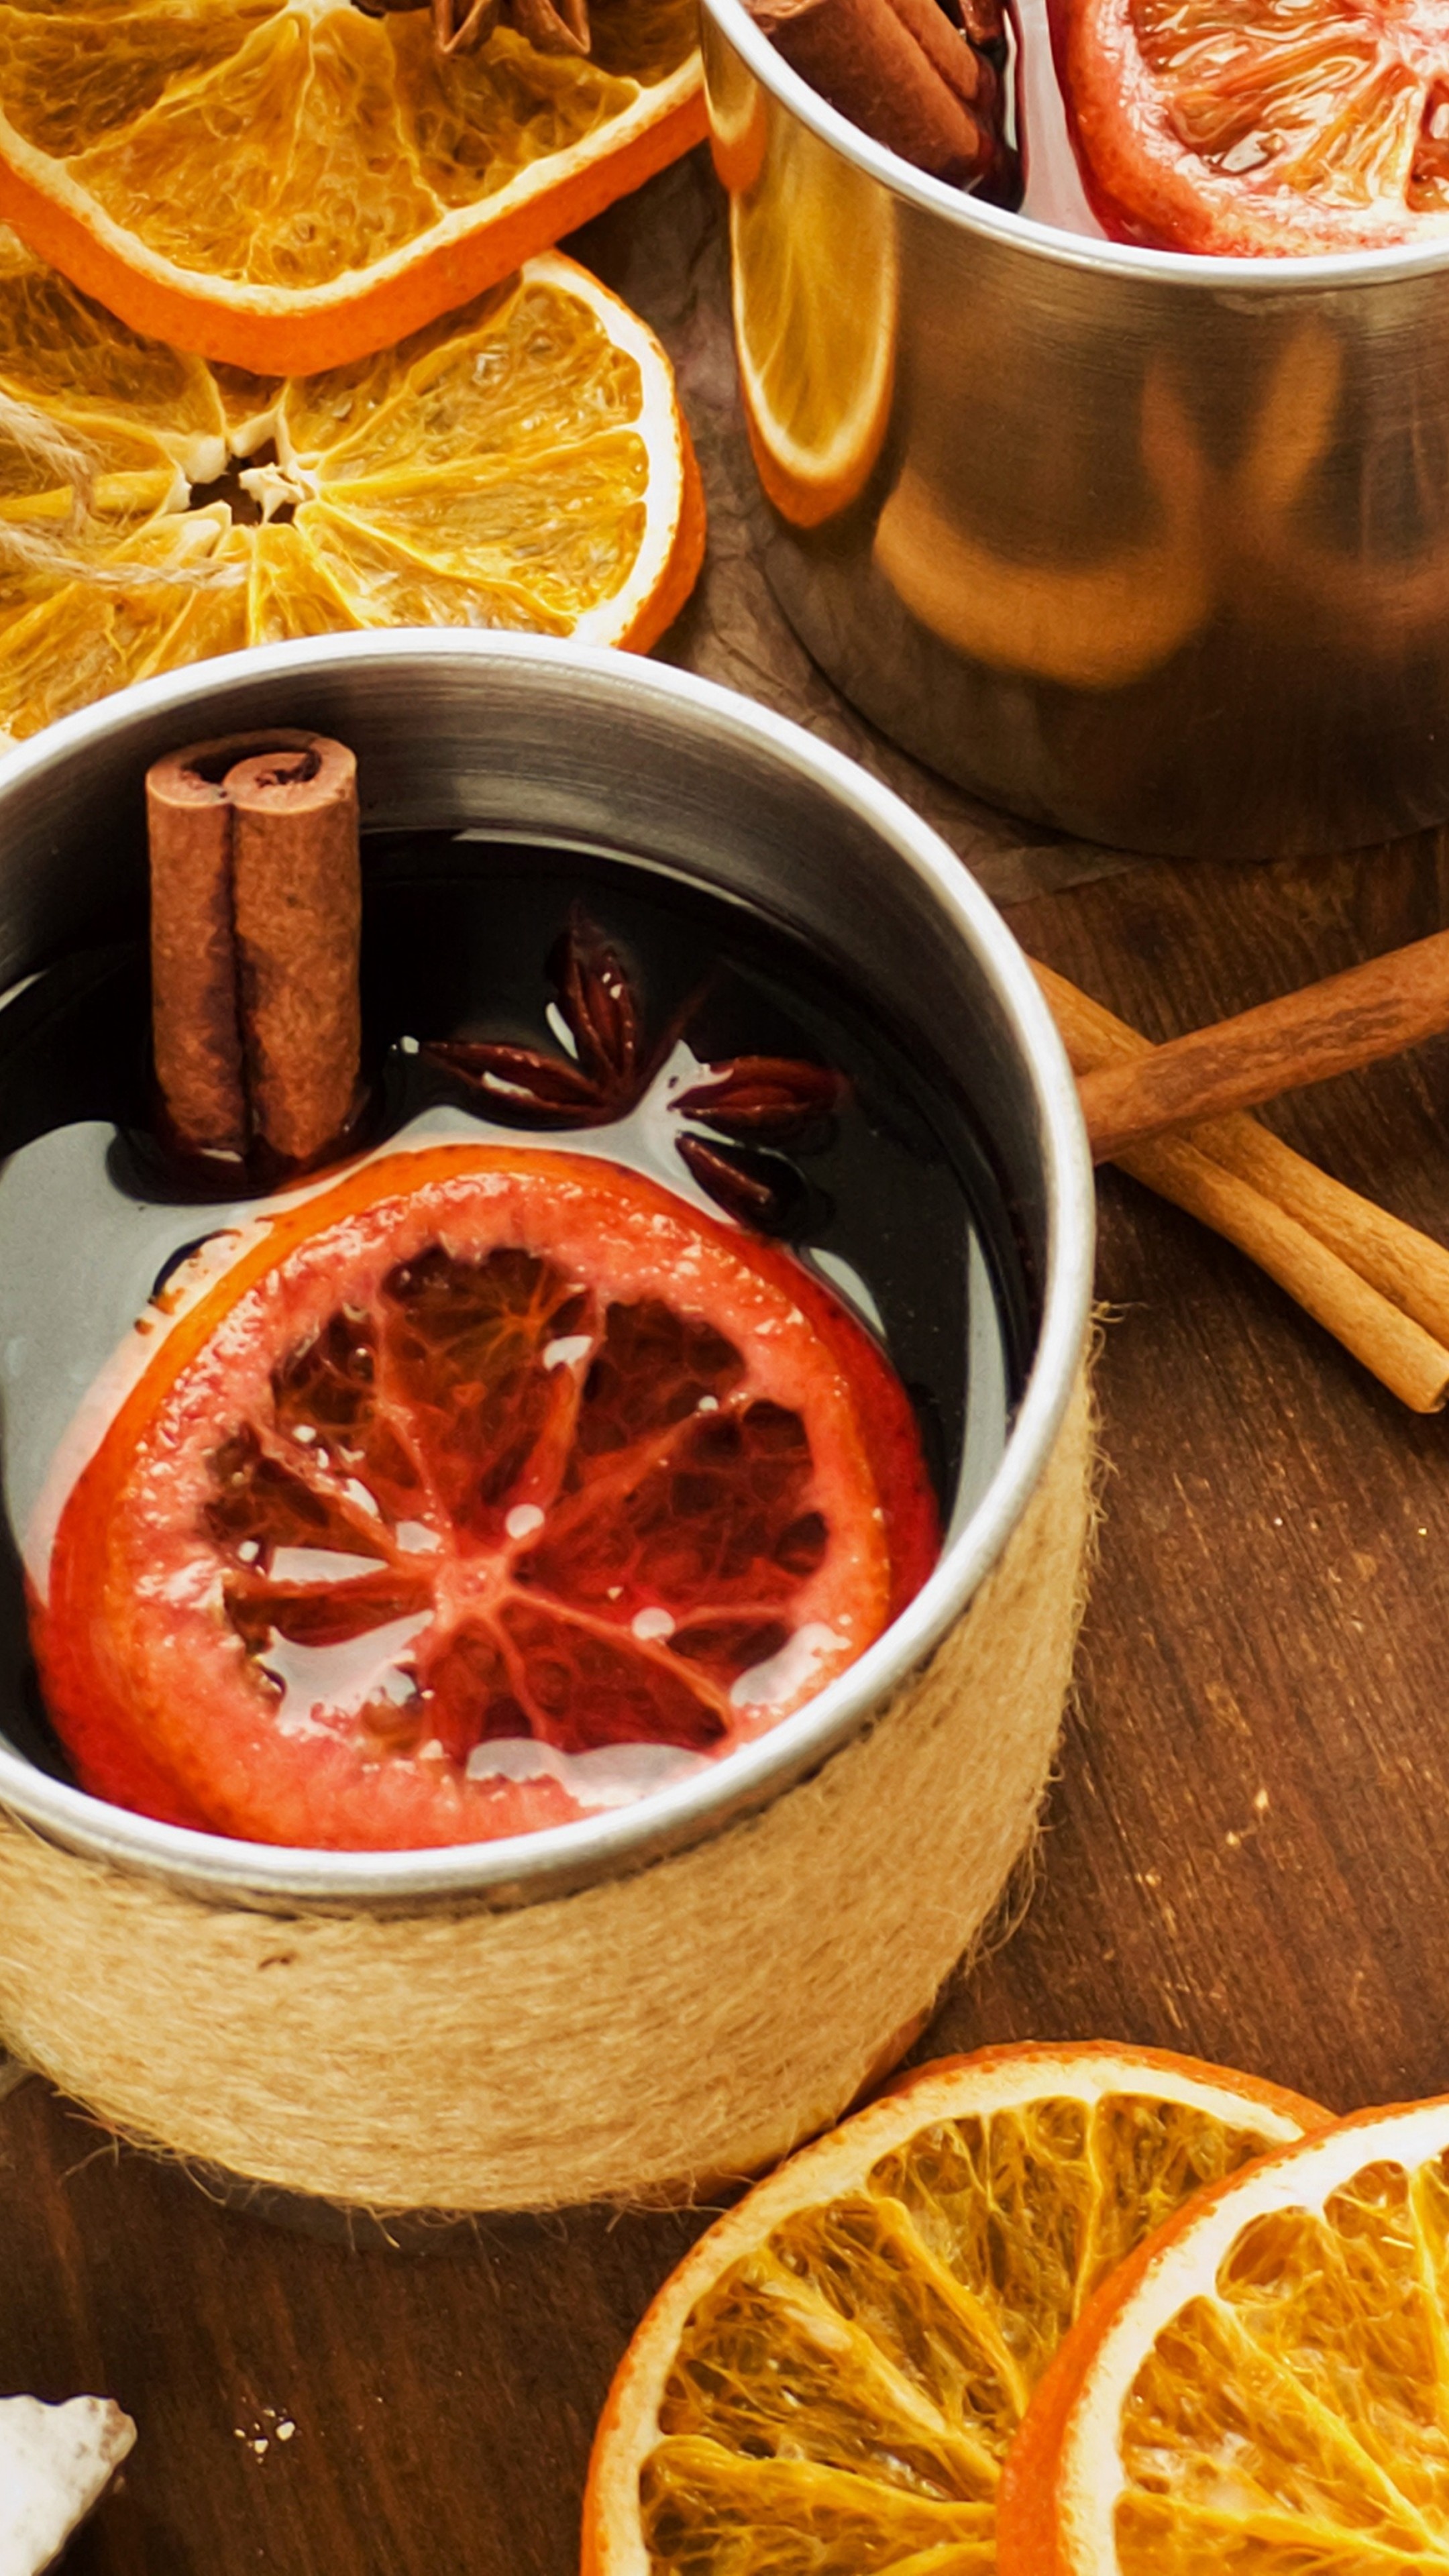 Mulled wine delight, Citrus-infused drink, Spiced cookies, Festive food, 2160x3840 4K Handy